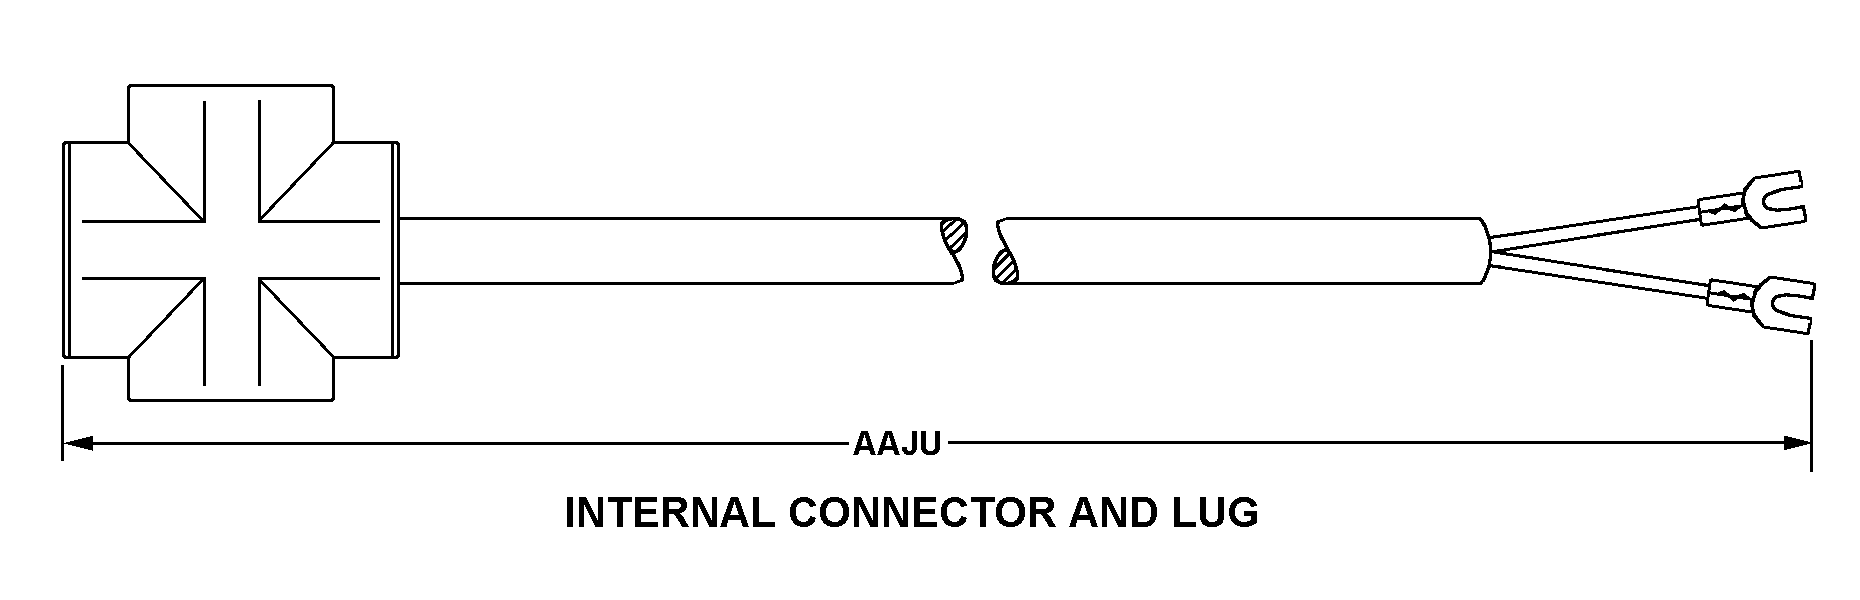 INTERNAL CONNECTOR AND LUG style nsn 6150-01-414-4571